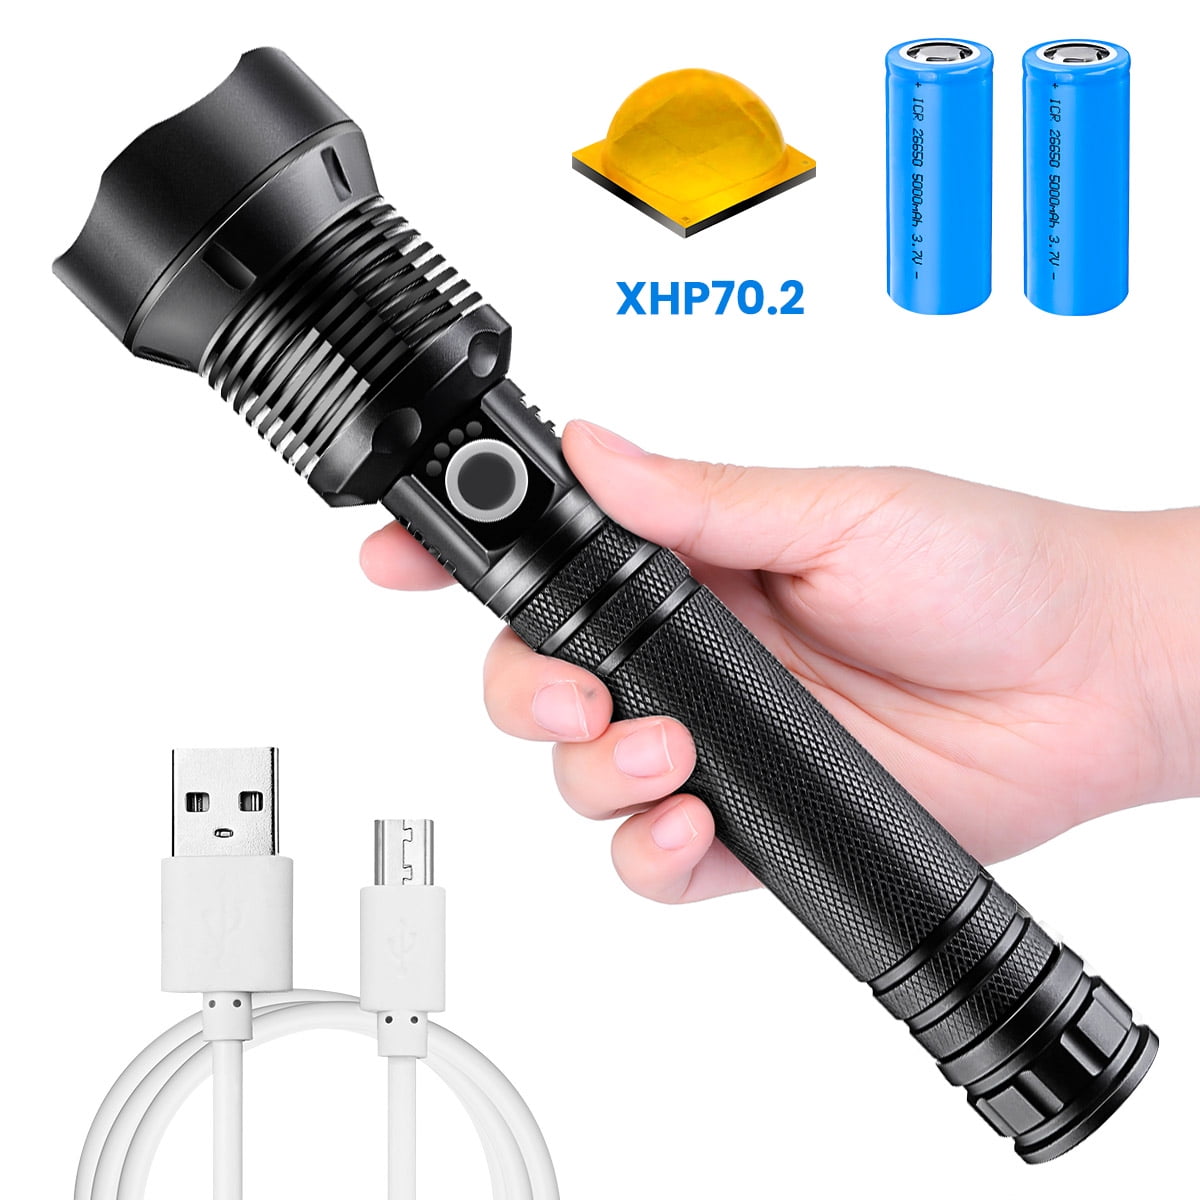 Glodmore2 36-Core Xhp360 Powerful LED Flashlight USB Rechargeable Xhp120  COB Zoomable Torch Super Bright Ipx5 Waterproof Camping Fishing - China  Waterproof, Outdoor